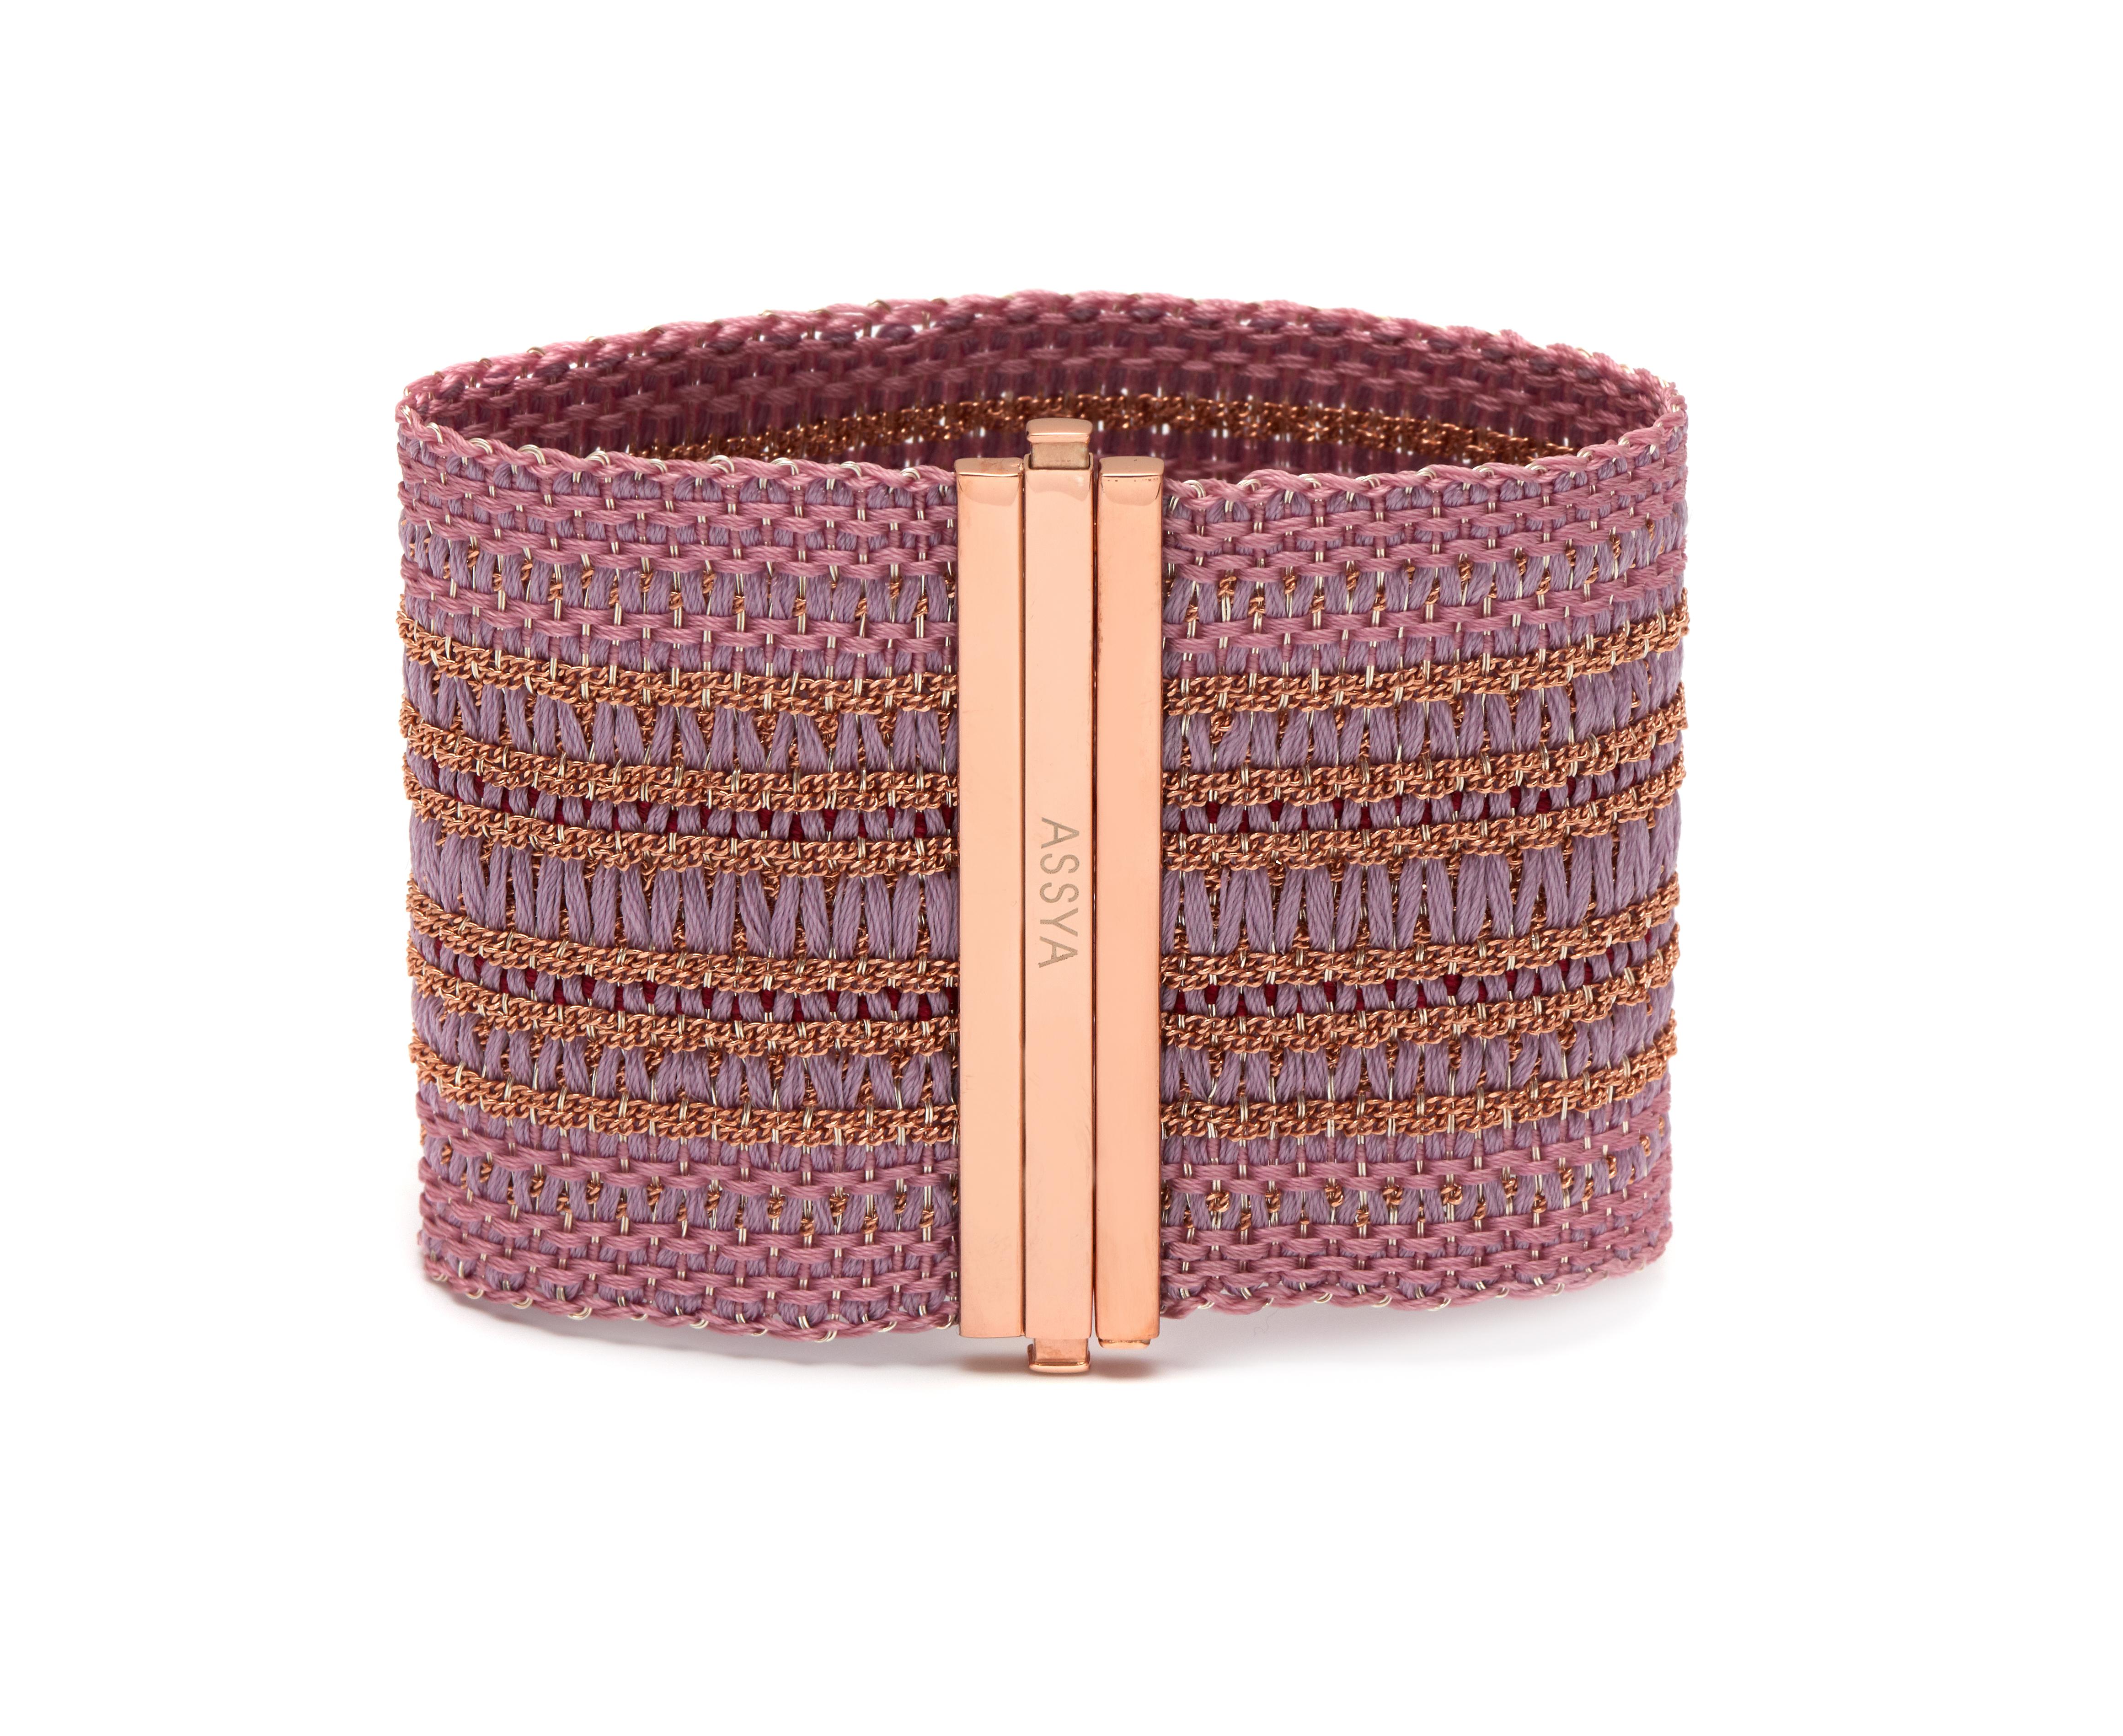 ASSYA London s exquisite Woven collection is handcrafted on an Italian loom using an ancient Florentine technique. The bracelet is cast from 18kt Rose Gold on Sterling Silver and threaded with light pink and lilac silk yarns into a unique design and